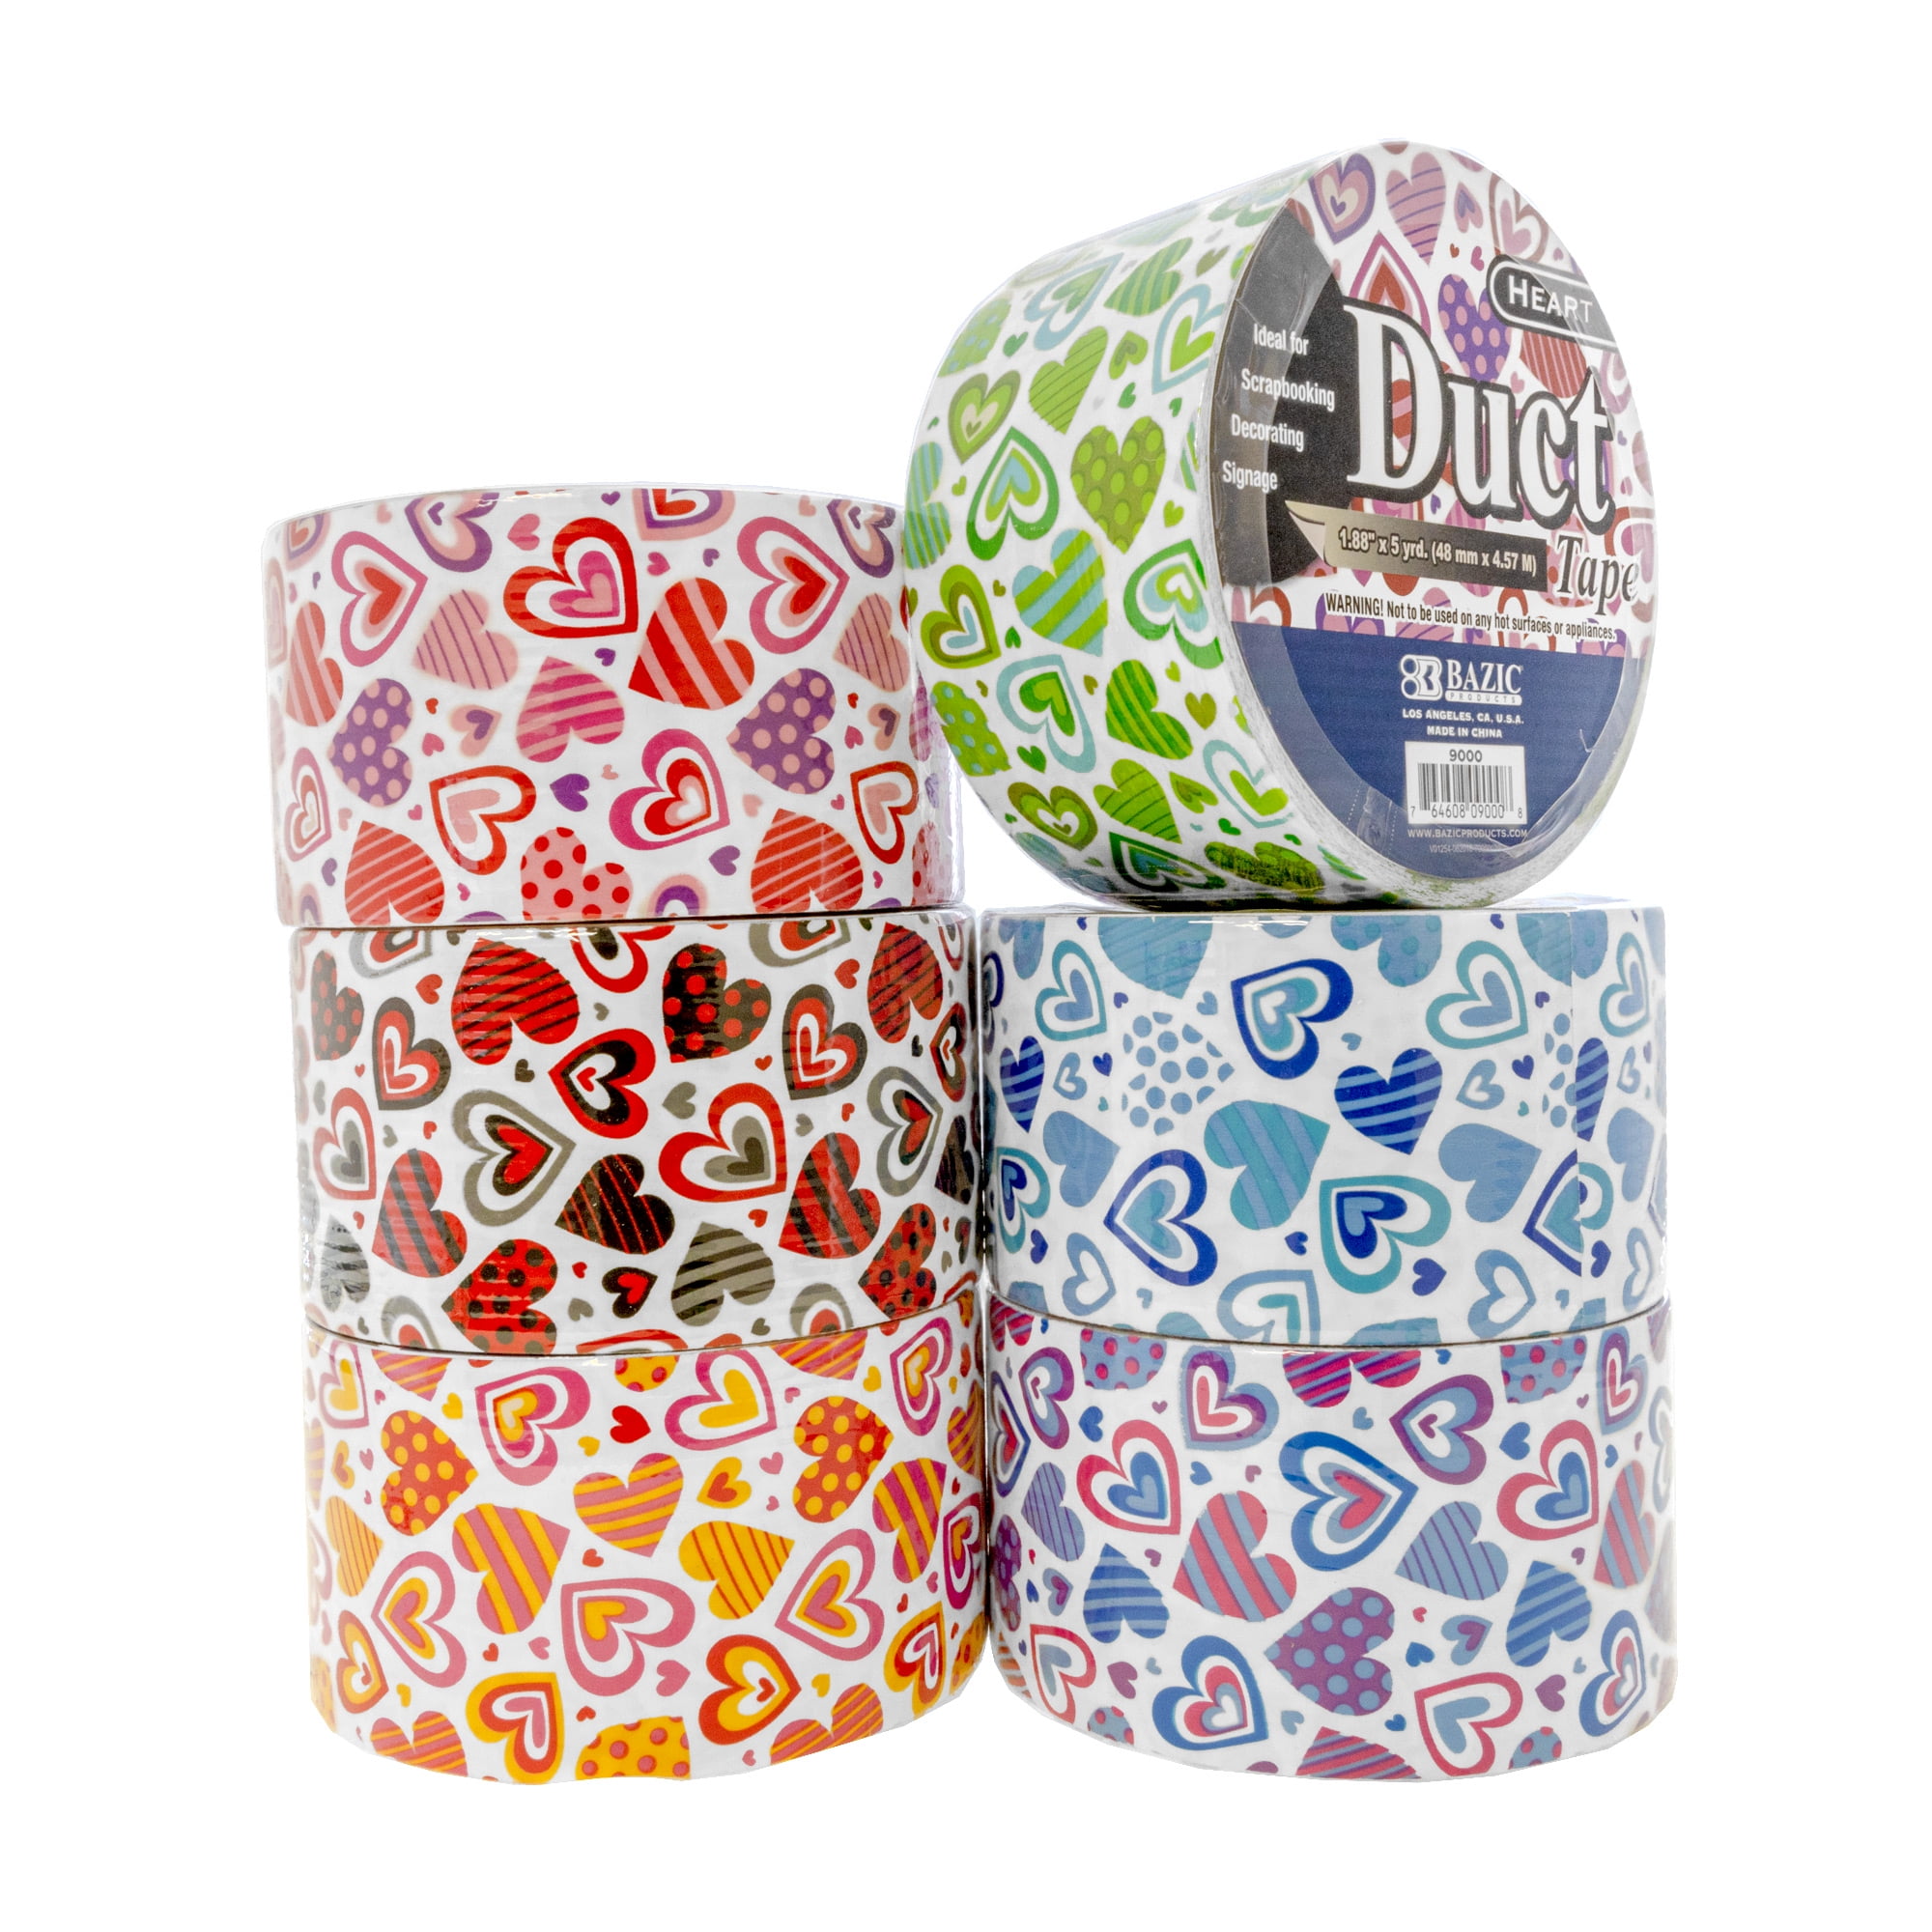 Fun Funny Duct Tape Silver Wrapping Paper